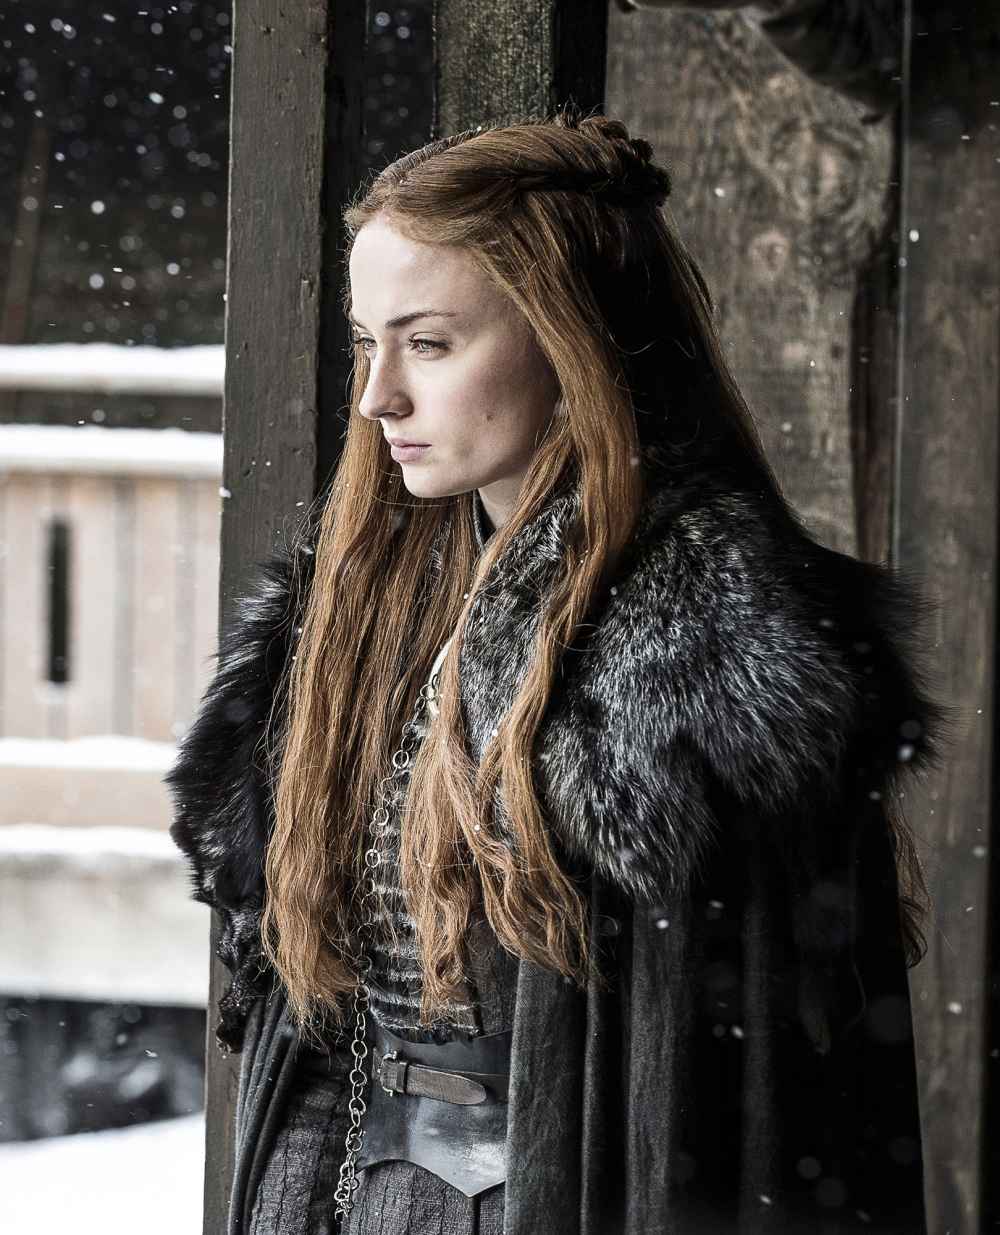 Sophie Turner Lose Weight for Game of Thrones